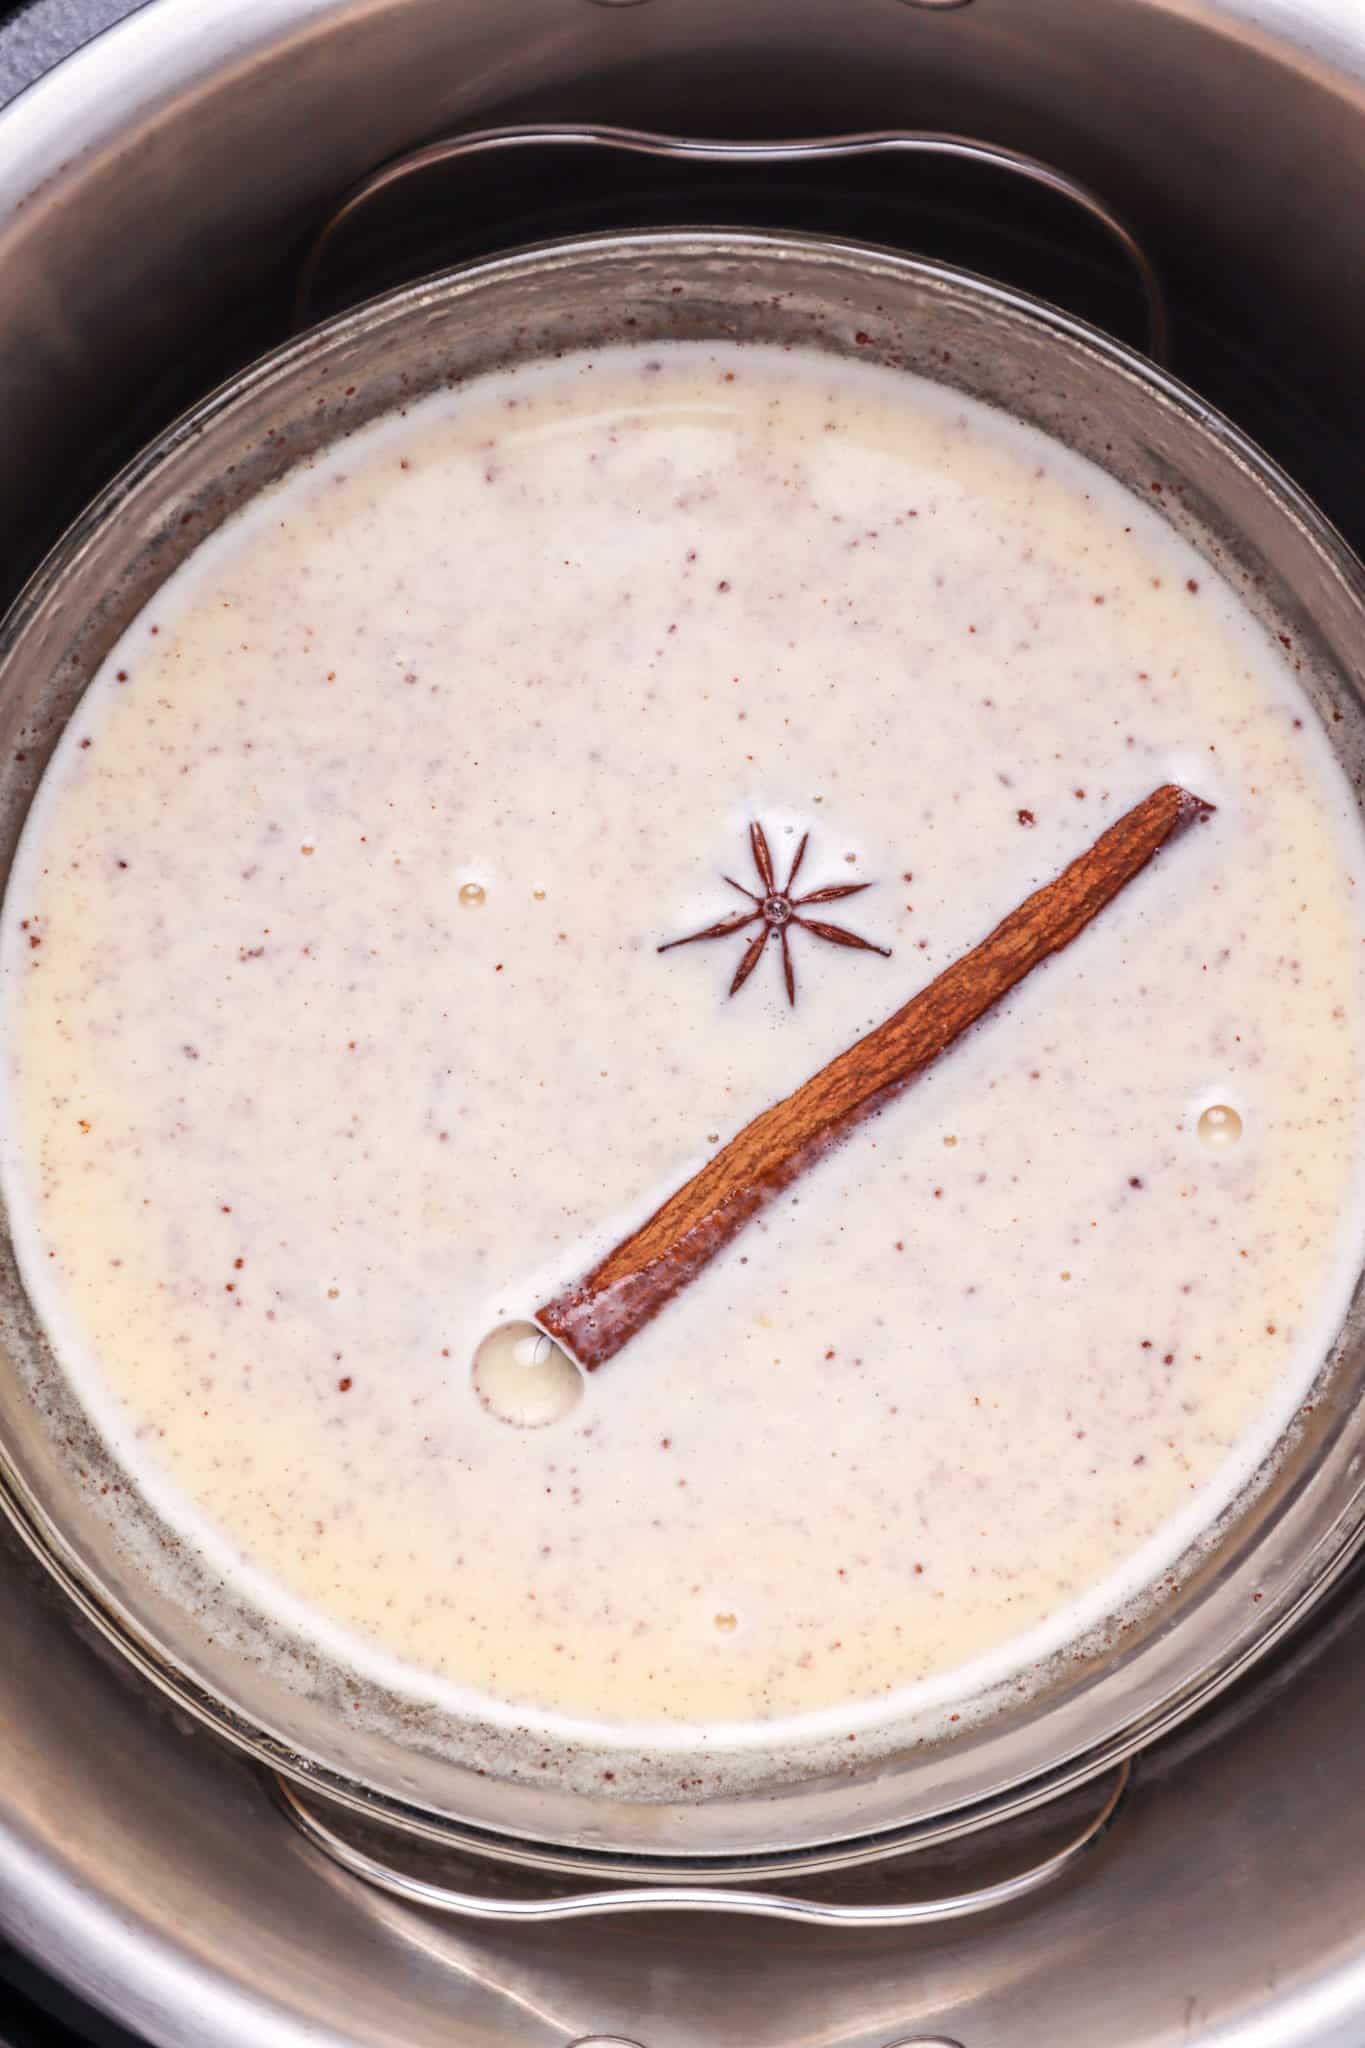 cinnamon stick and star anise floating in egg, sugar, cream mixture shown inside the pressure cooker.